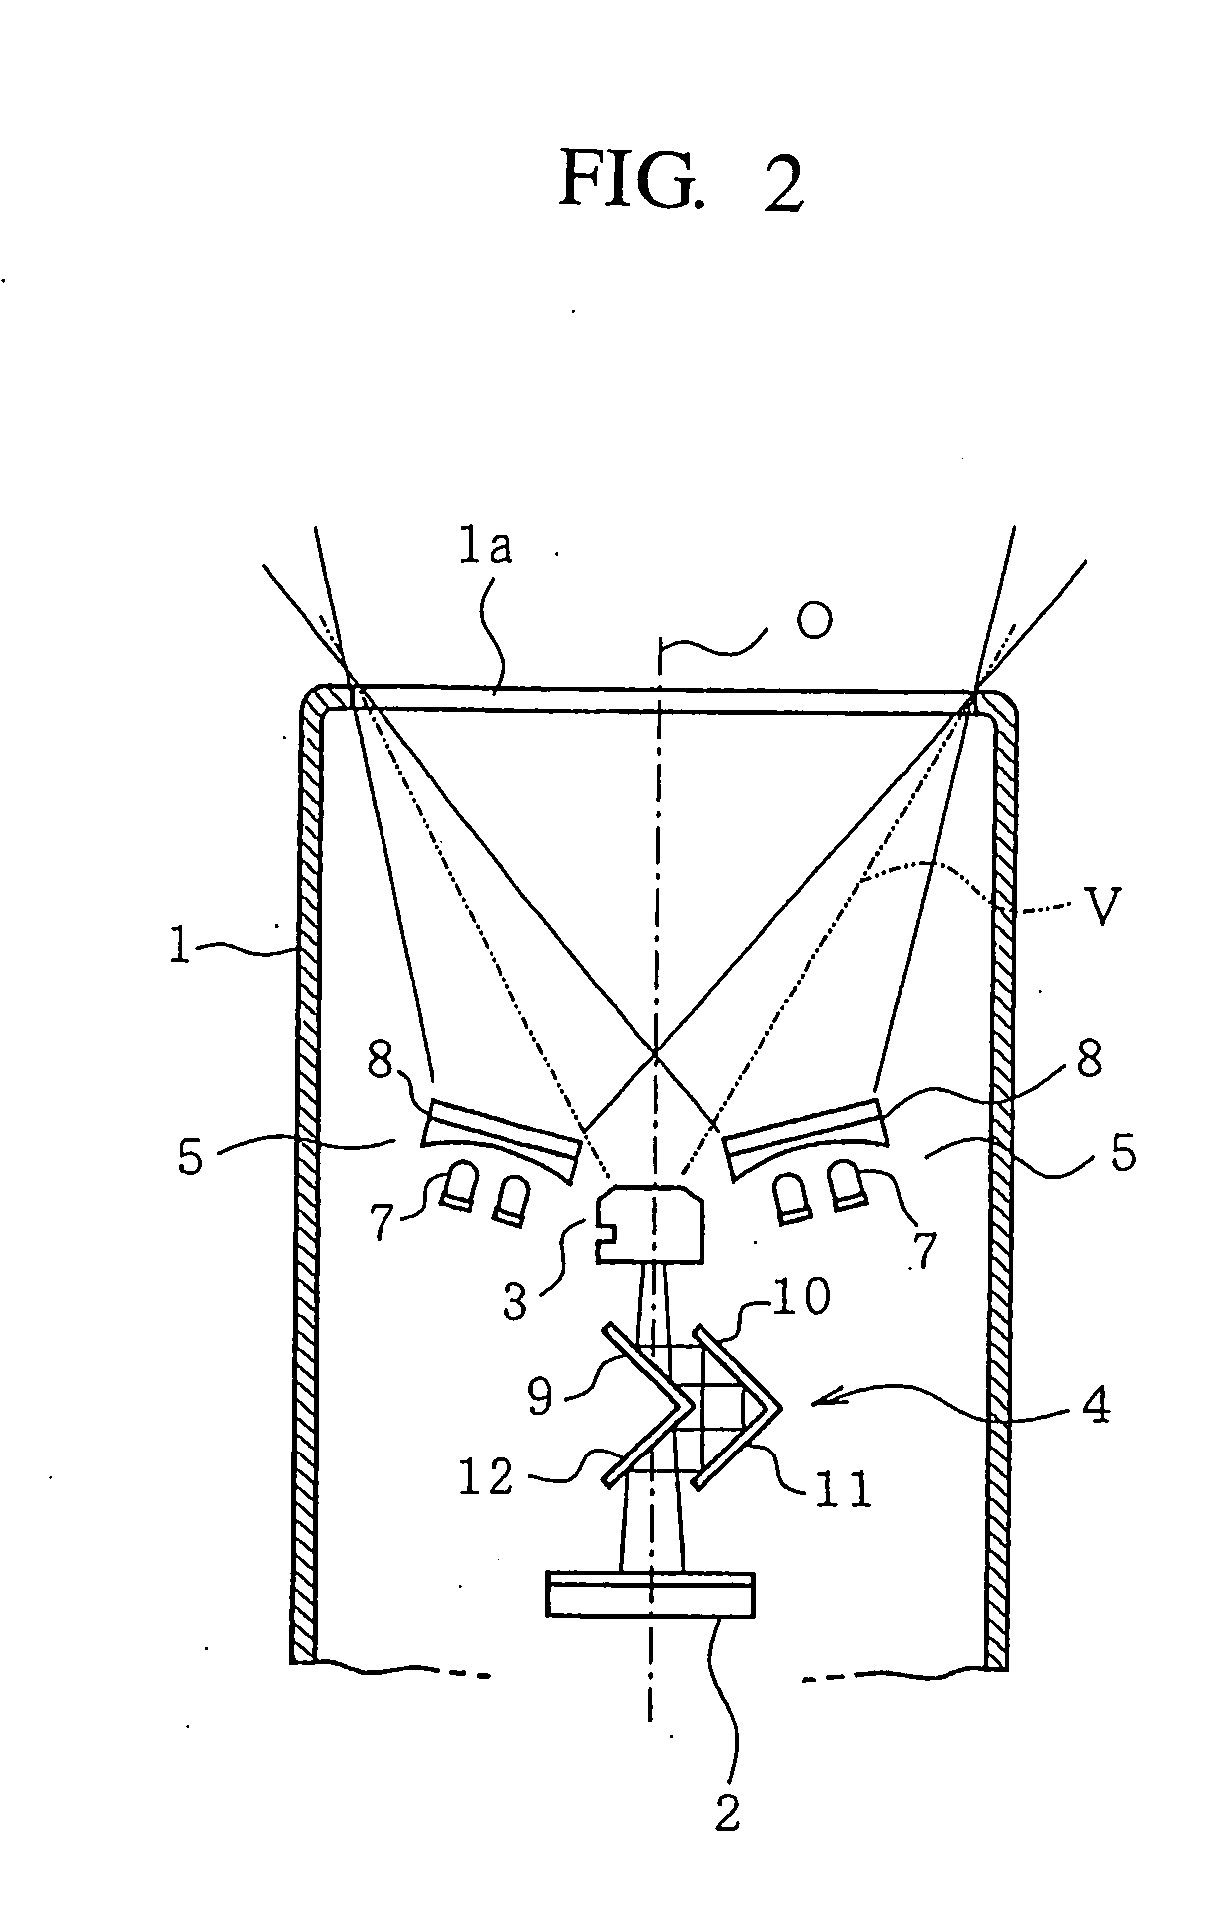 Method and apparatus for optically reading information from object based on control of optical path length